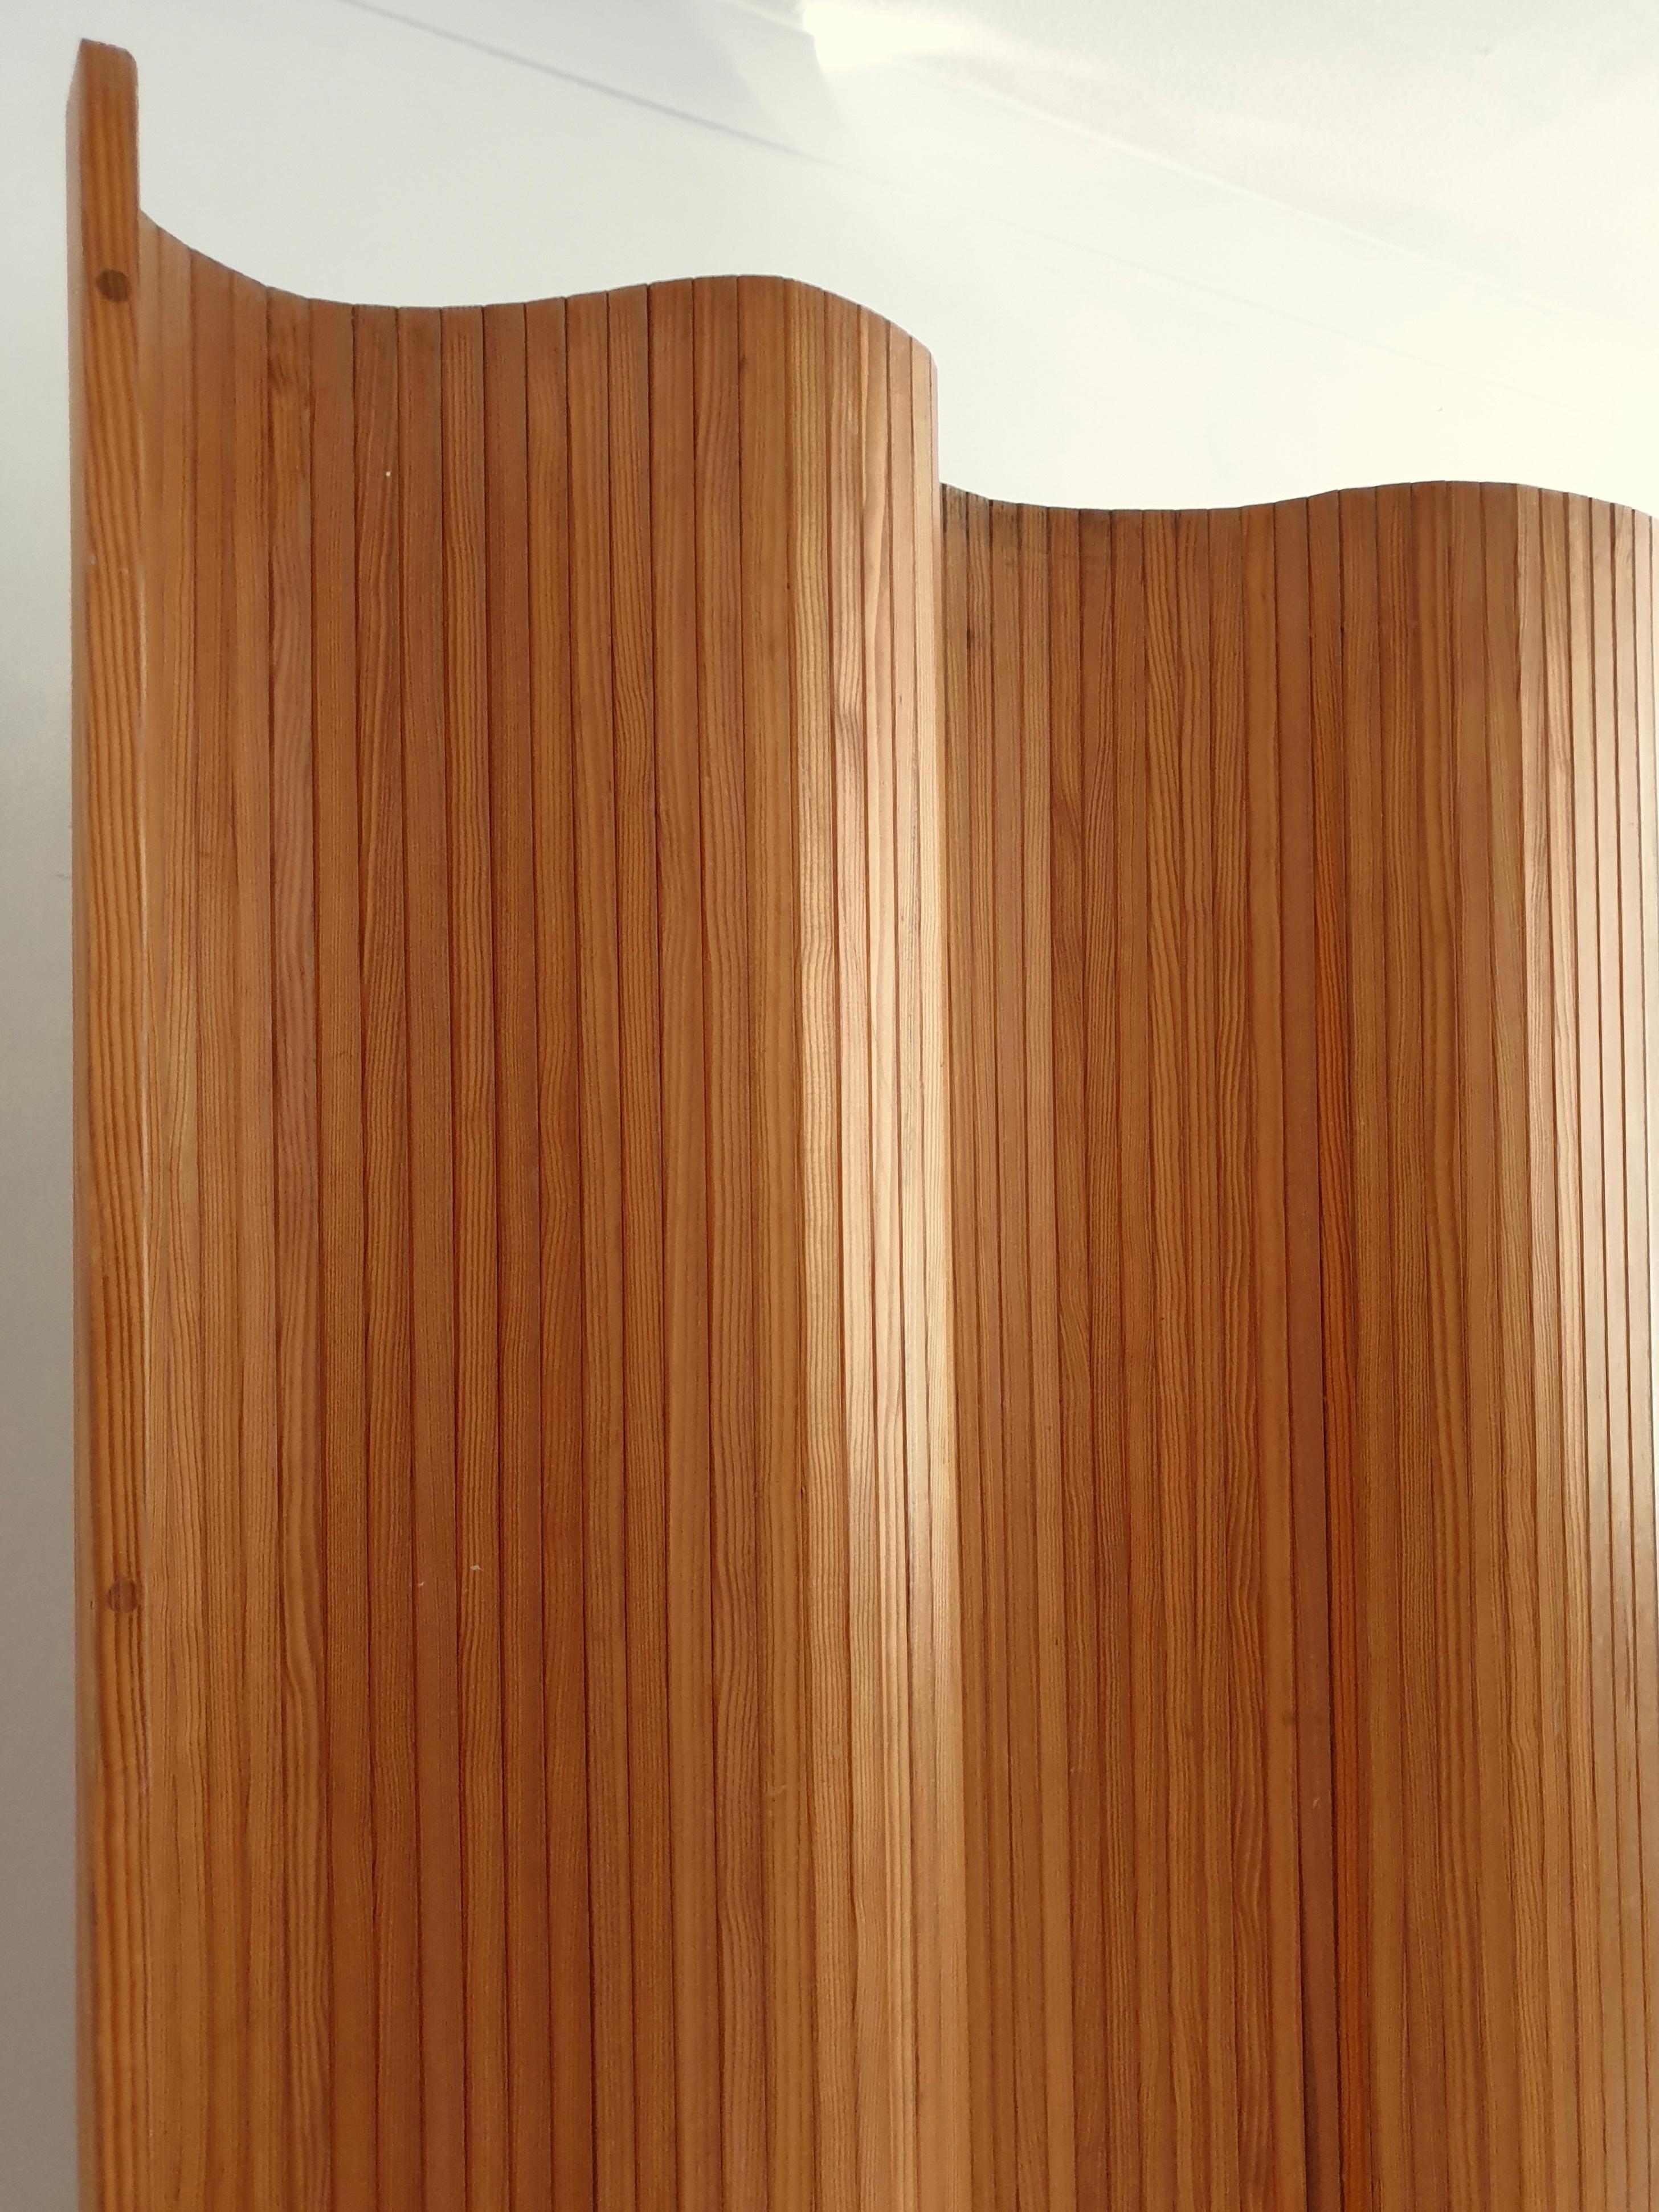 Pine Tambour Room Divider / Screen in the Manner of Aalto by Habitat, circa 1980 4